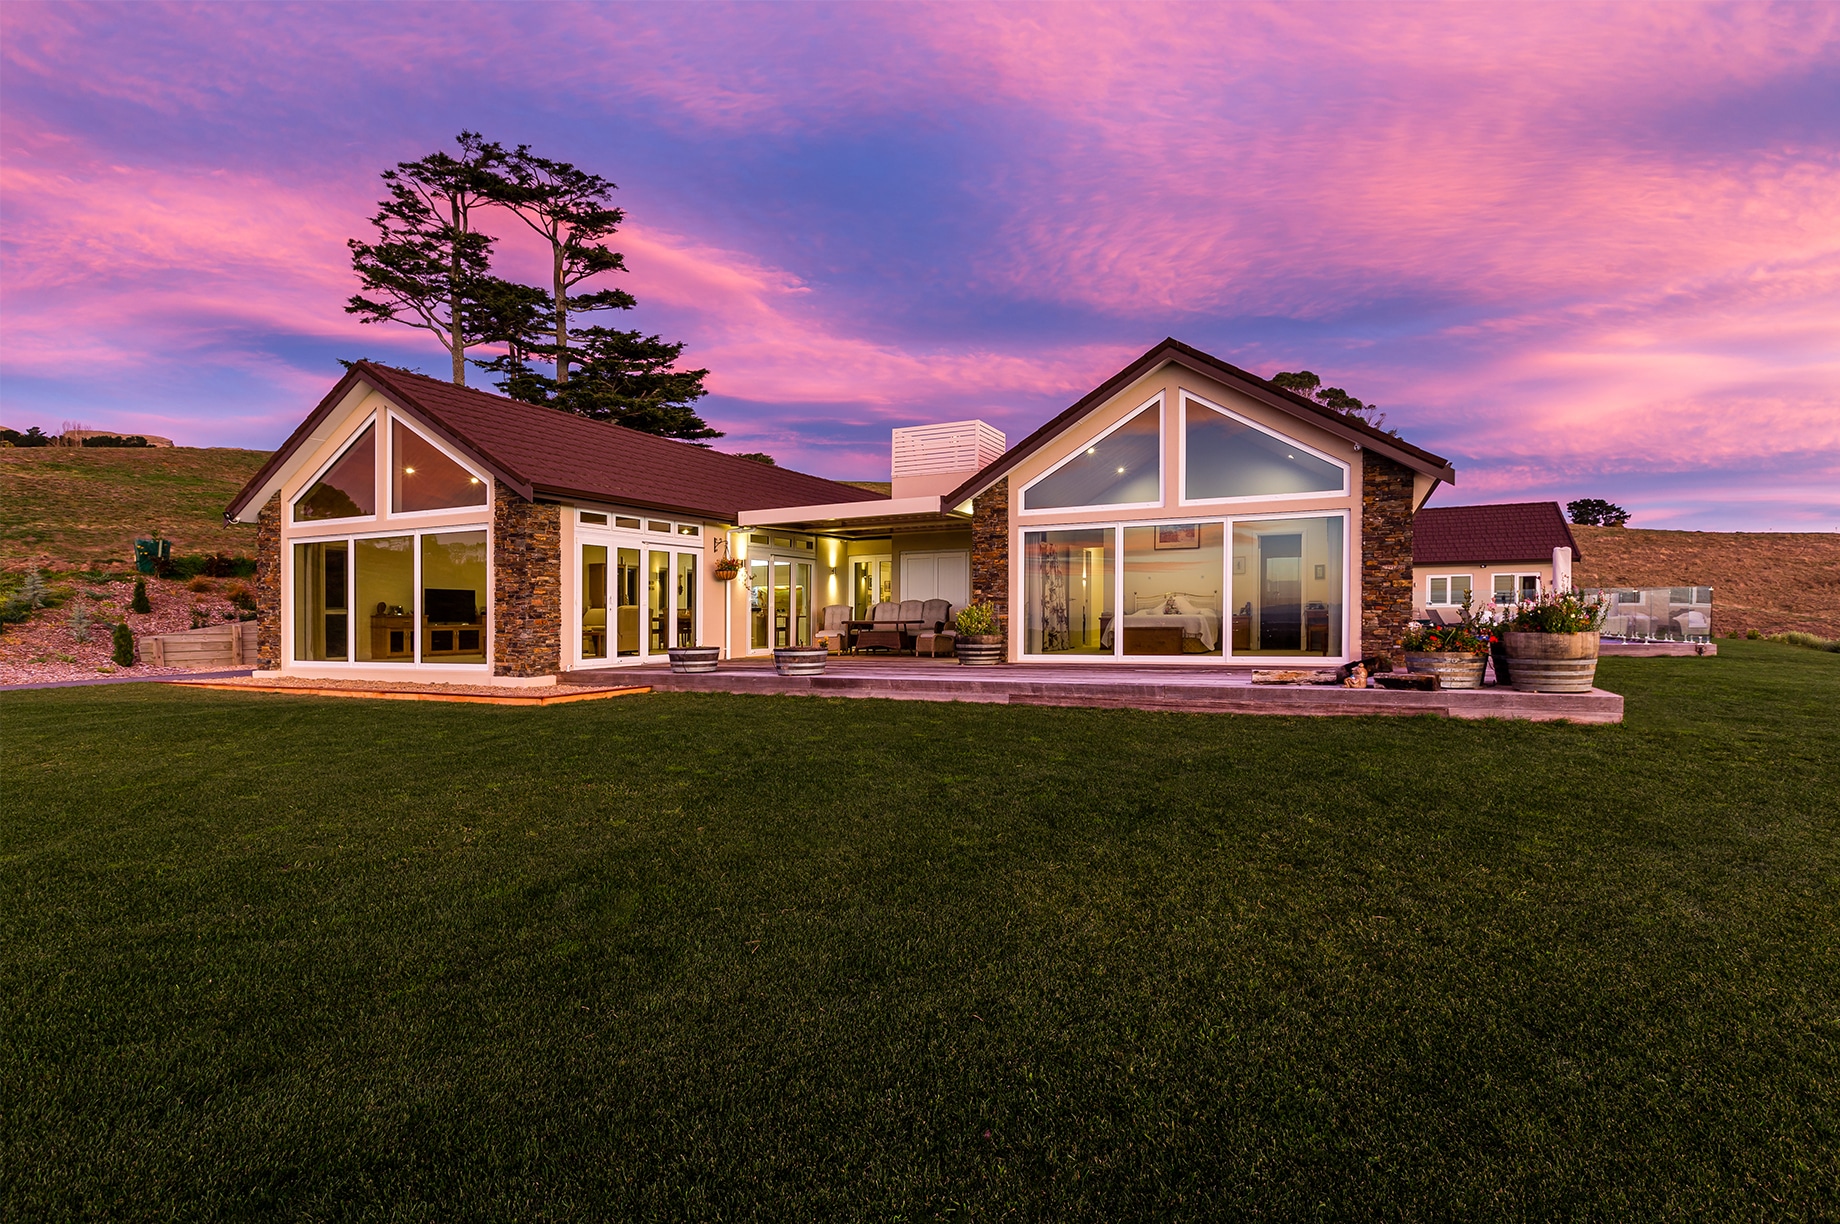 Rural house exterior during sunset